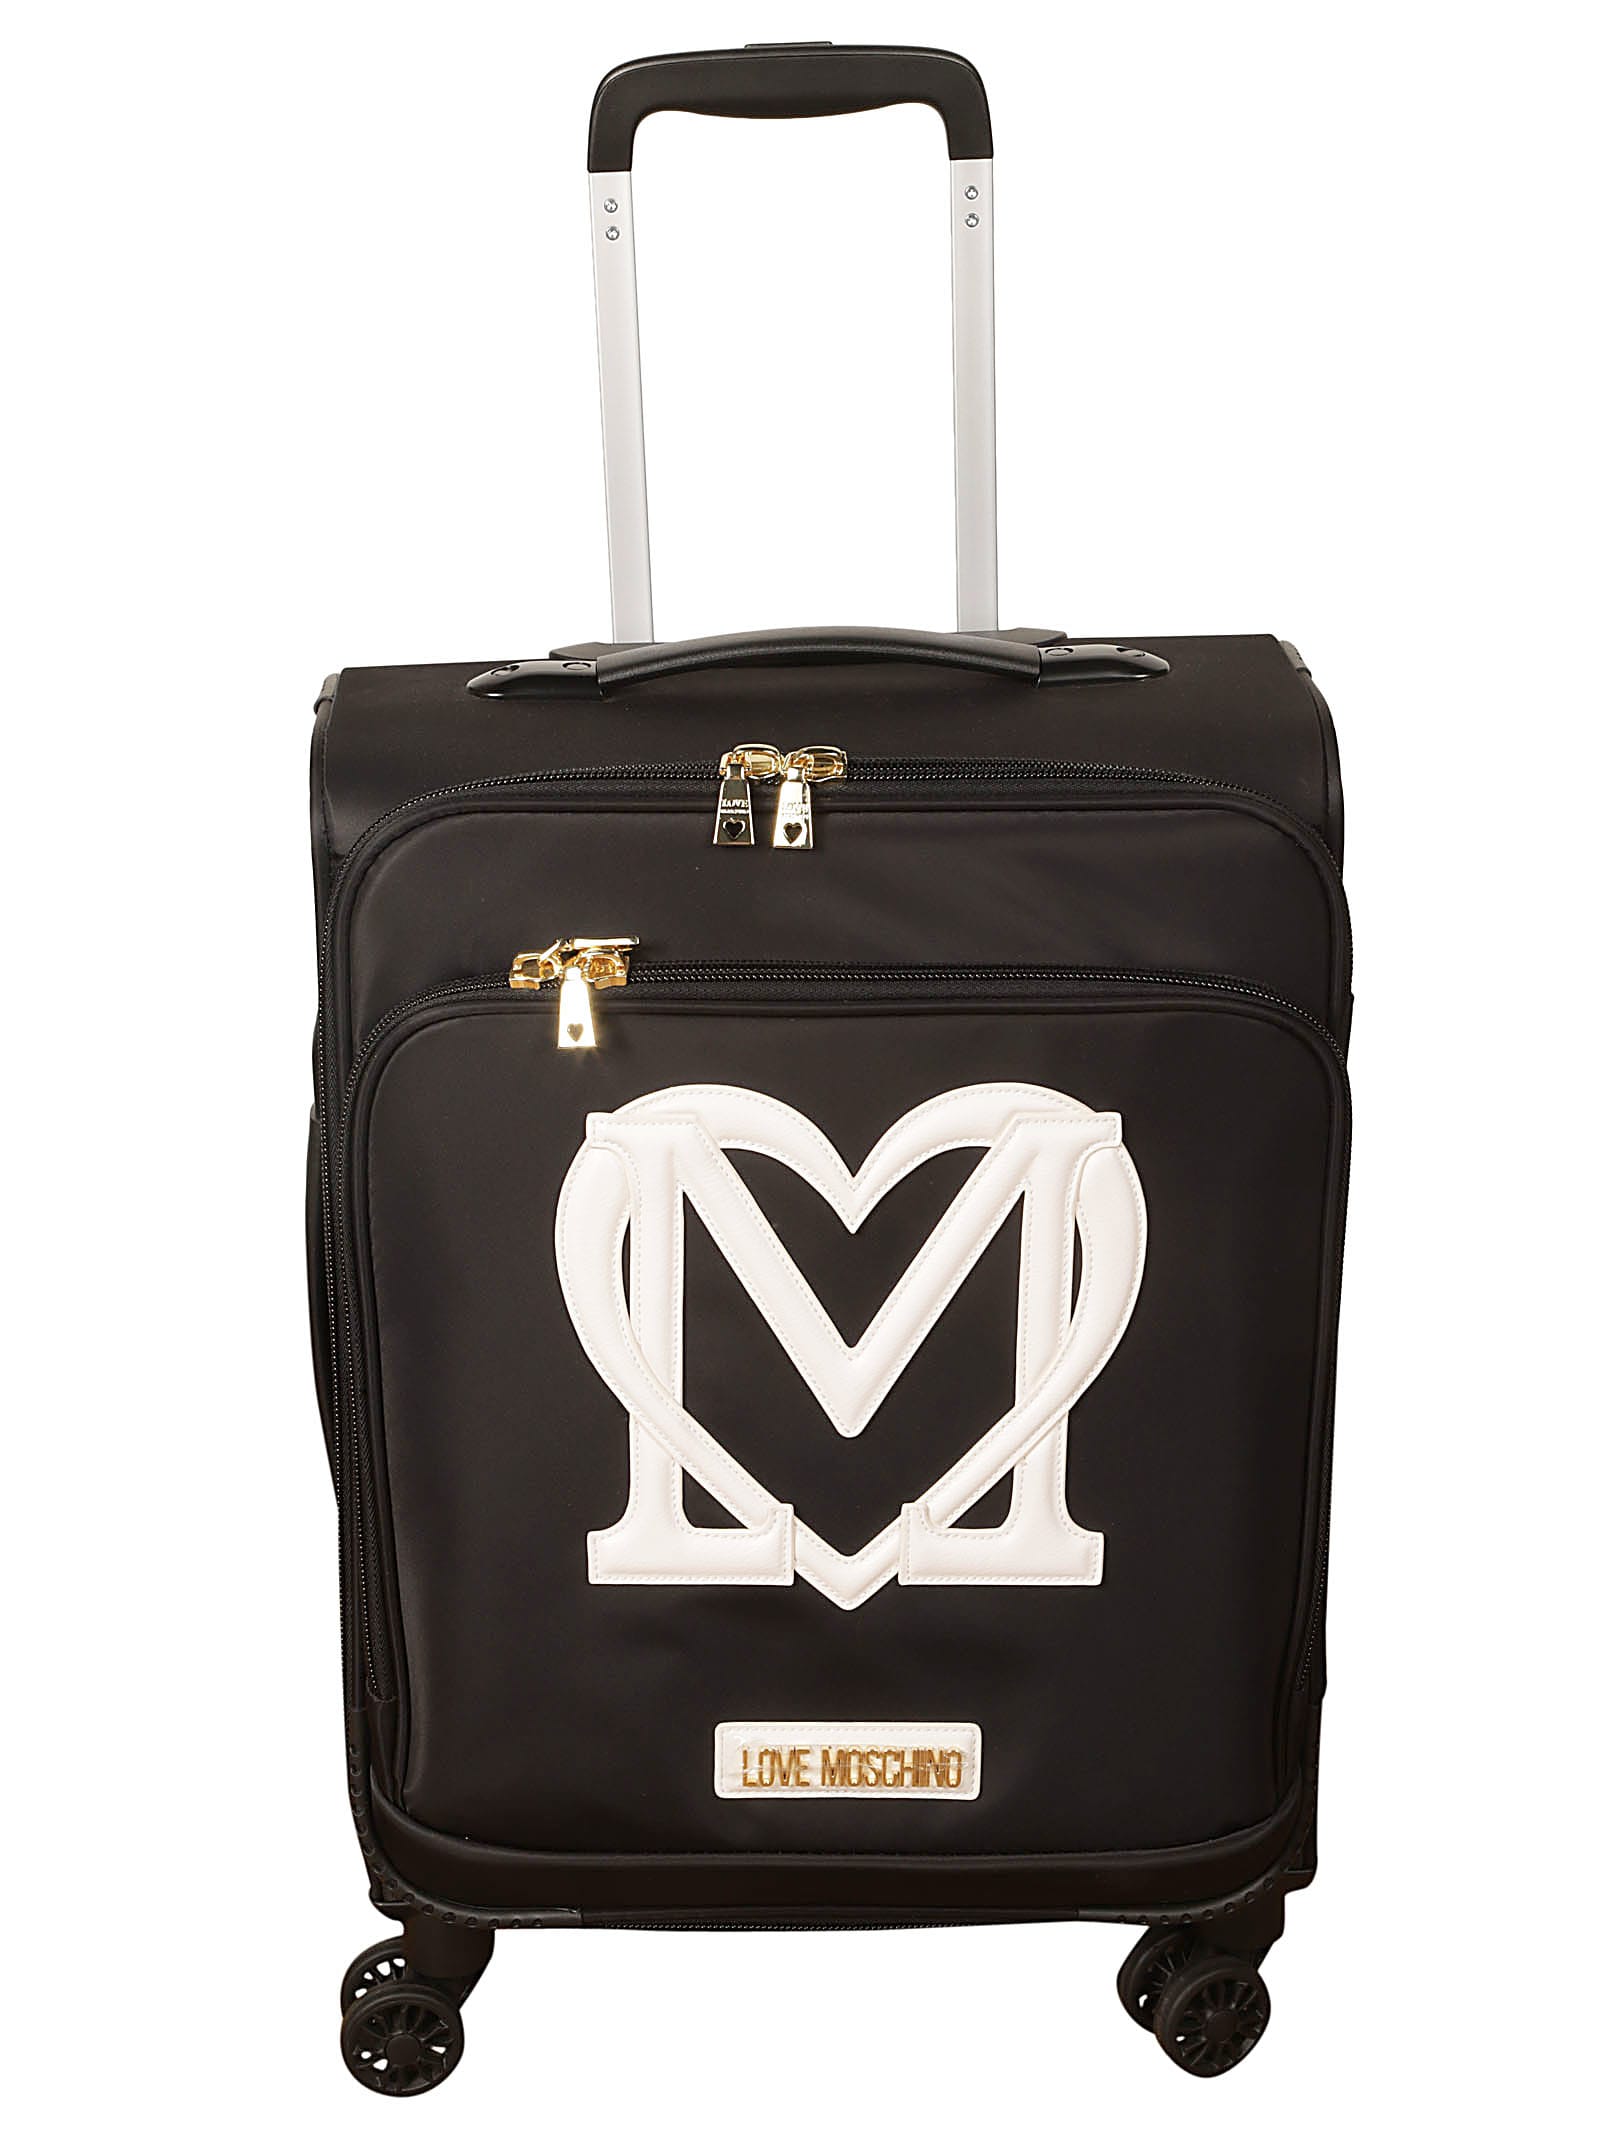 Heart Patched Two-way Zipped Trolley Luggage